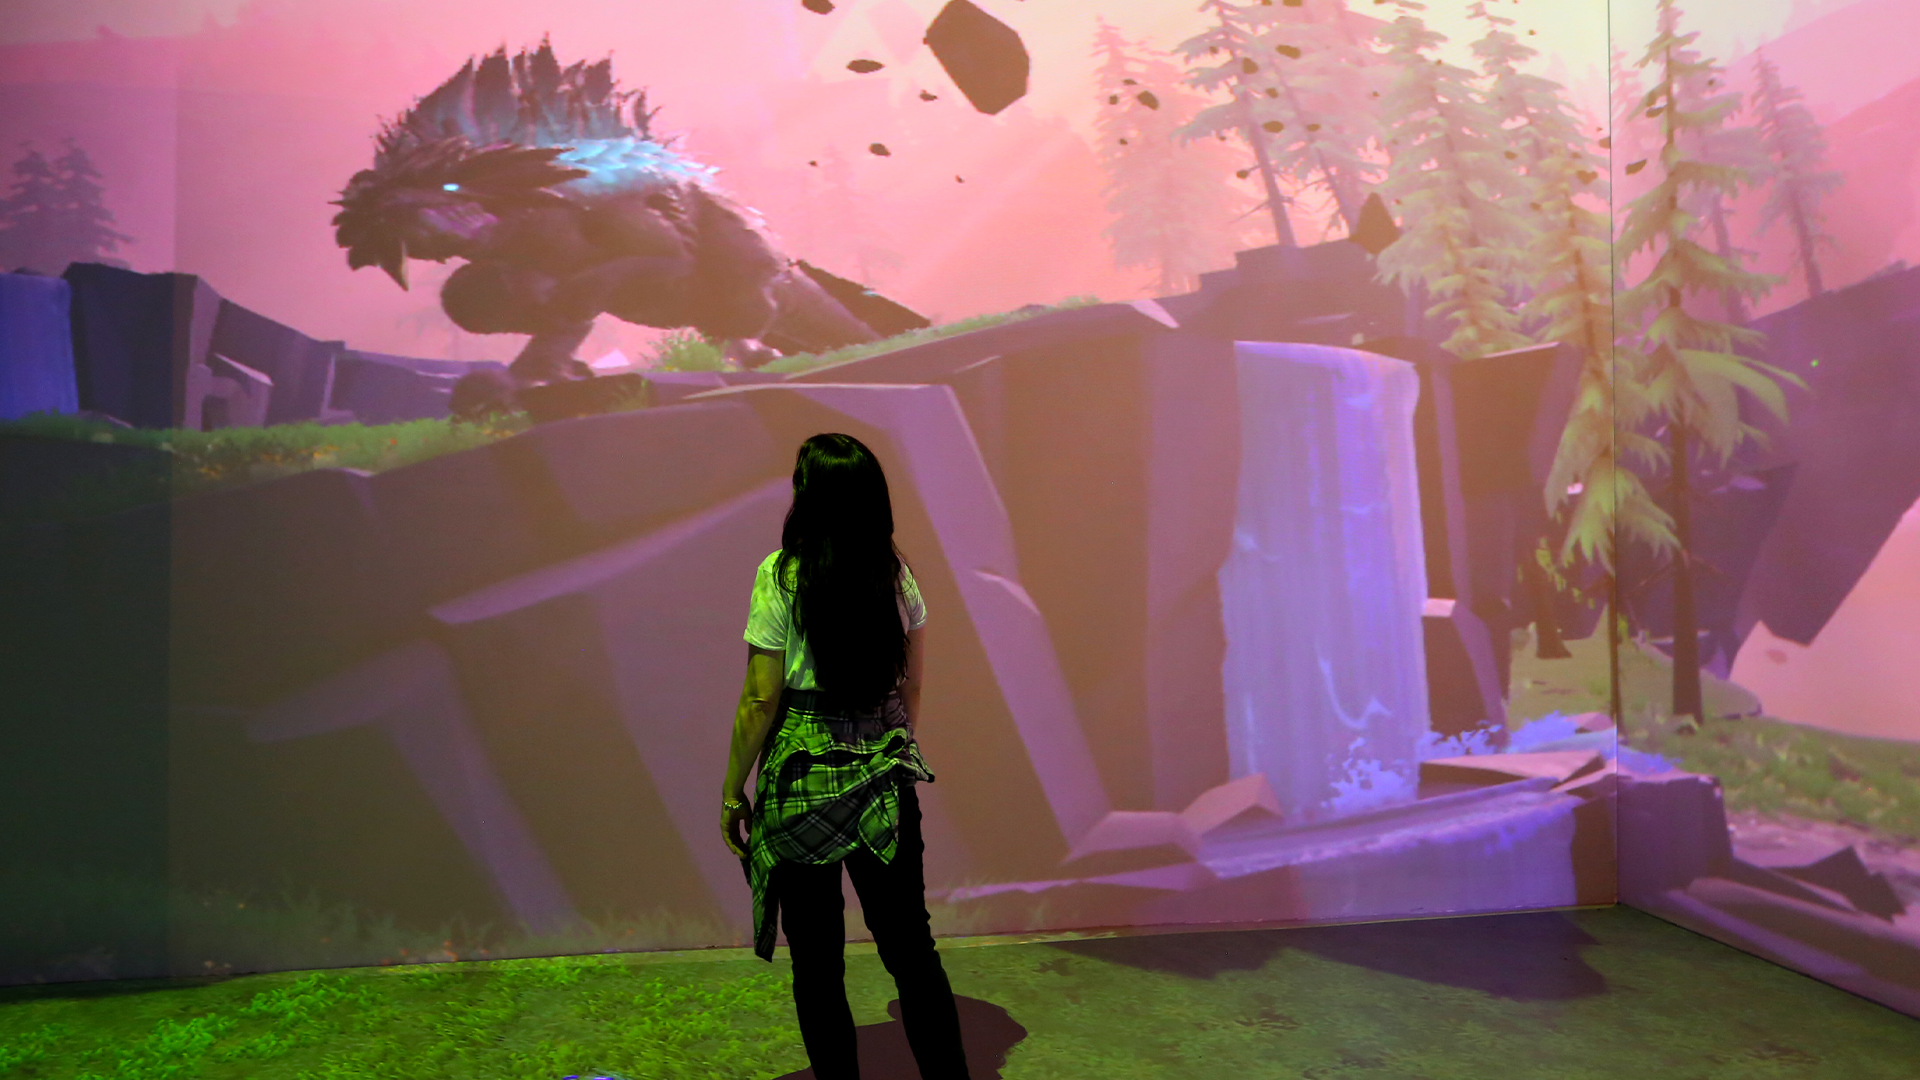 Thematically resembling the Pacific Northwest, Play, welcomes visitors into a fantastical world called Iron Falls. Here, visitors can hop around on floating stones, leave a sparkling, magical dust trail as they walk through the room, and engage with other animations. This room is the culmination of the gallery’s thematic journey and an opportunity for visitors to reimagine what kind of stories are possible with technology.